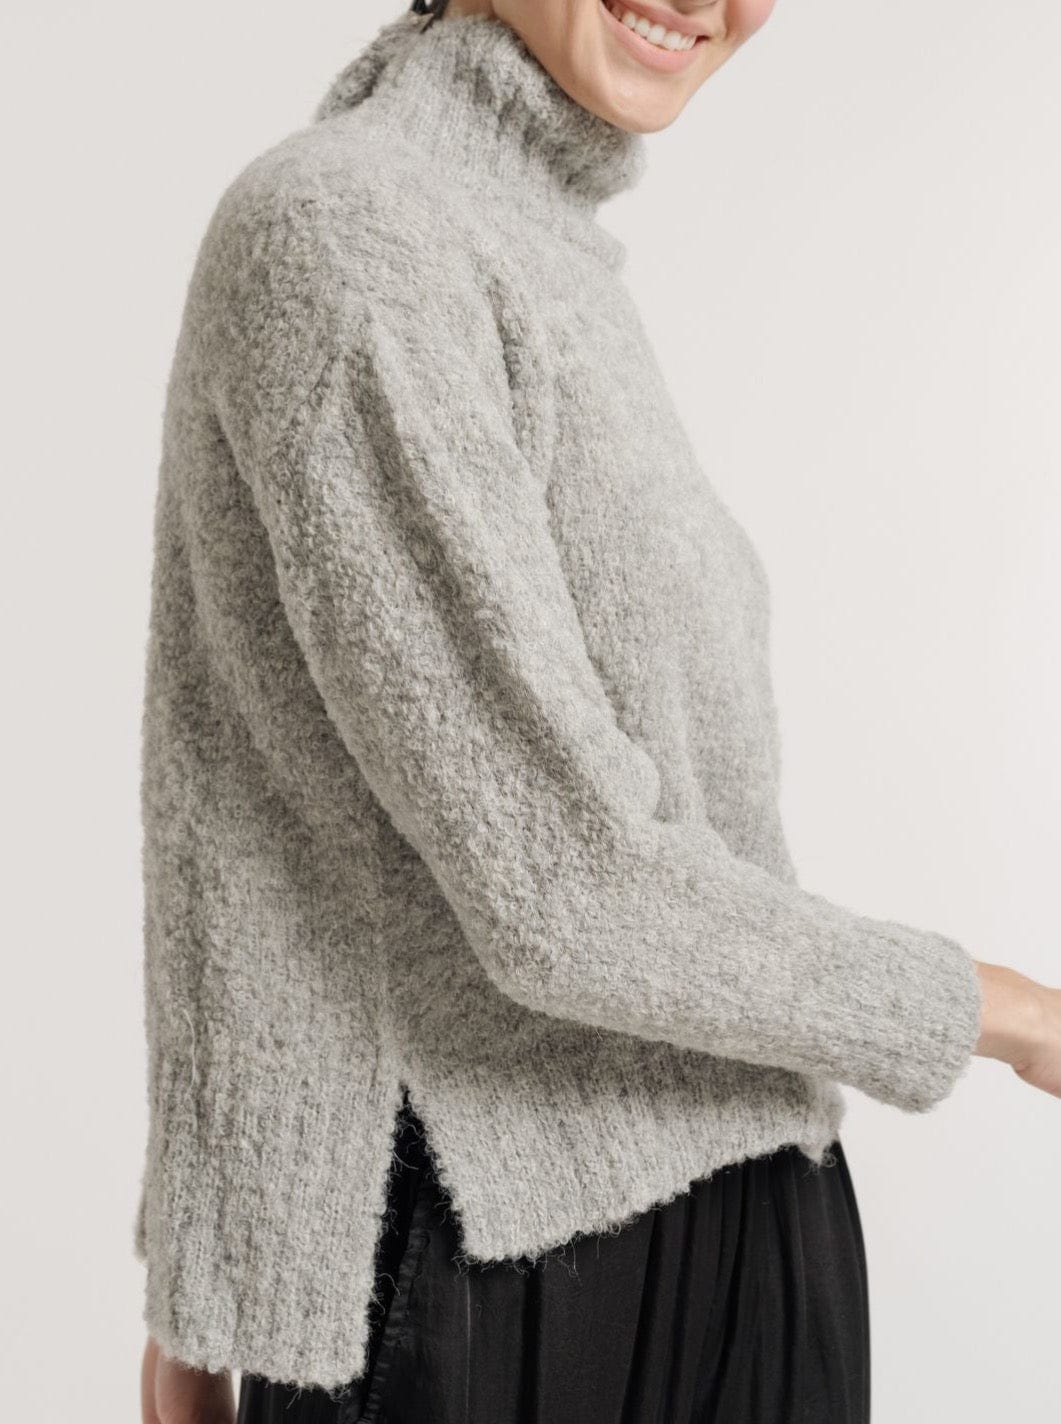 The model is wearing a Totto Sweater - Ghost Grey.